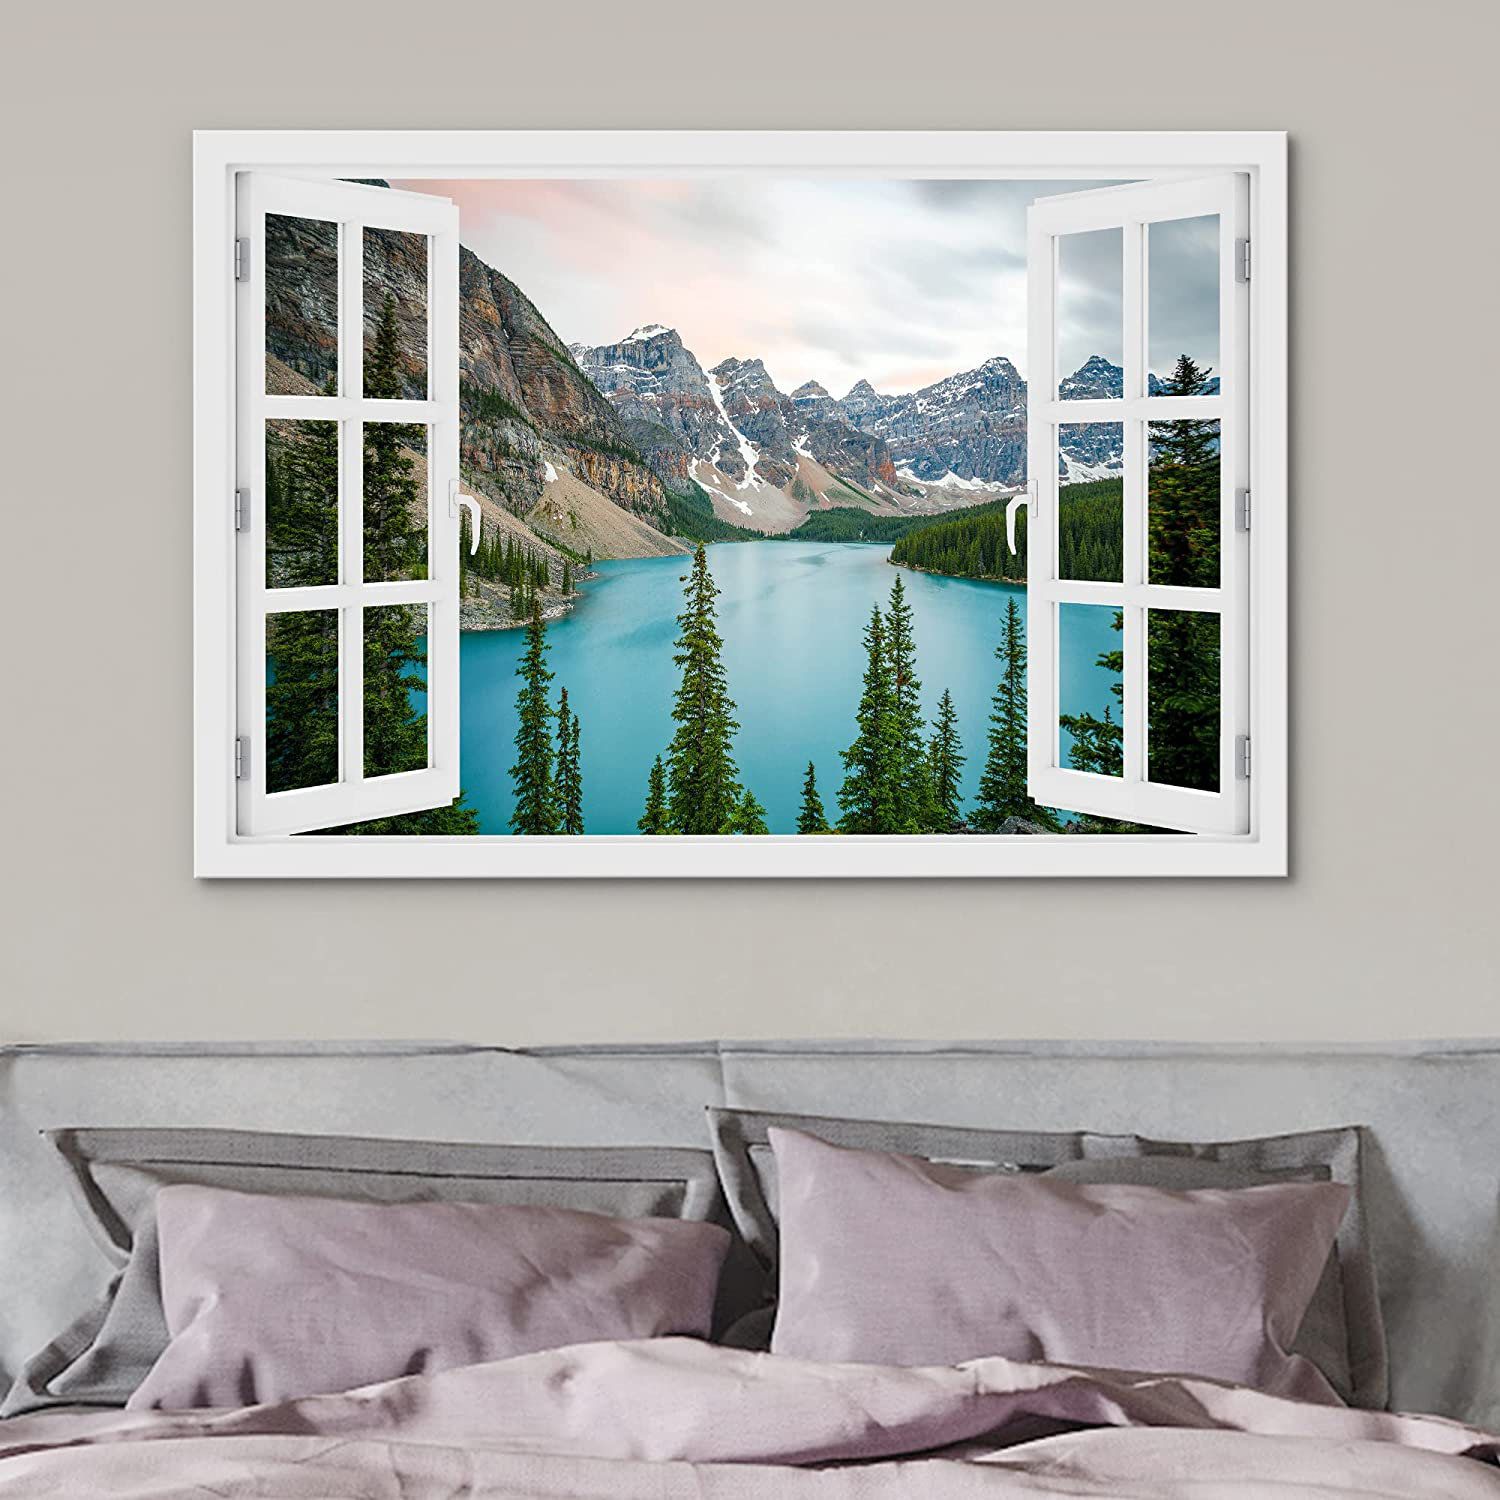 Idea4wall Scenic Spring Mountain Lake – Unframed Graphic Art On Canvas |  Wayfair With Regard To Most Current Mountain Lake Wall Art (View 15 of 20)